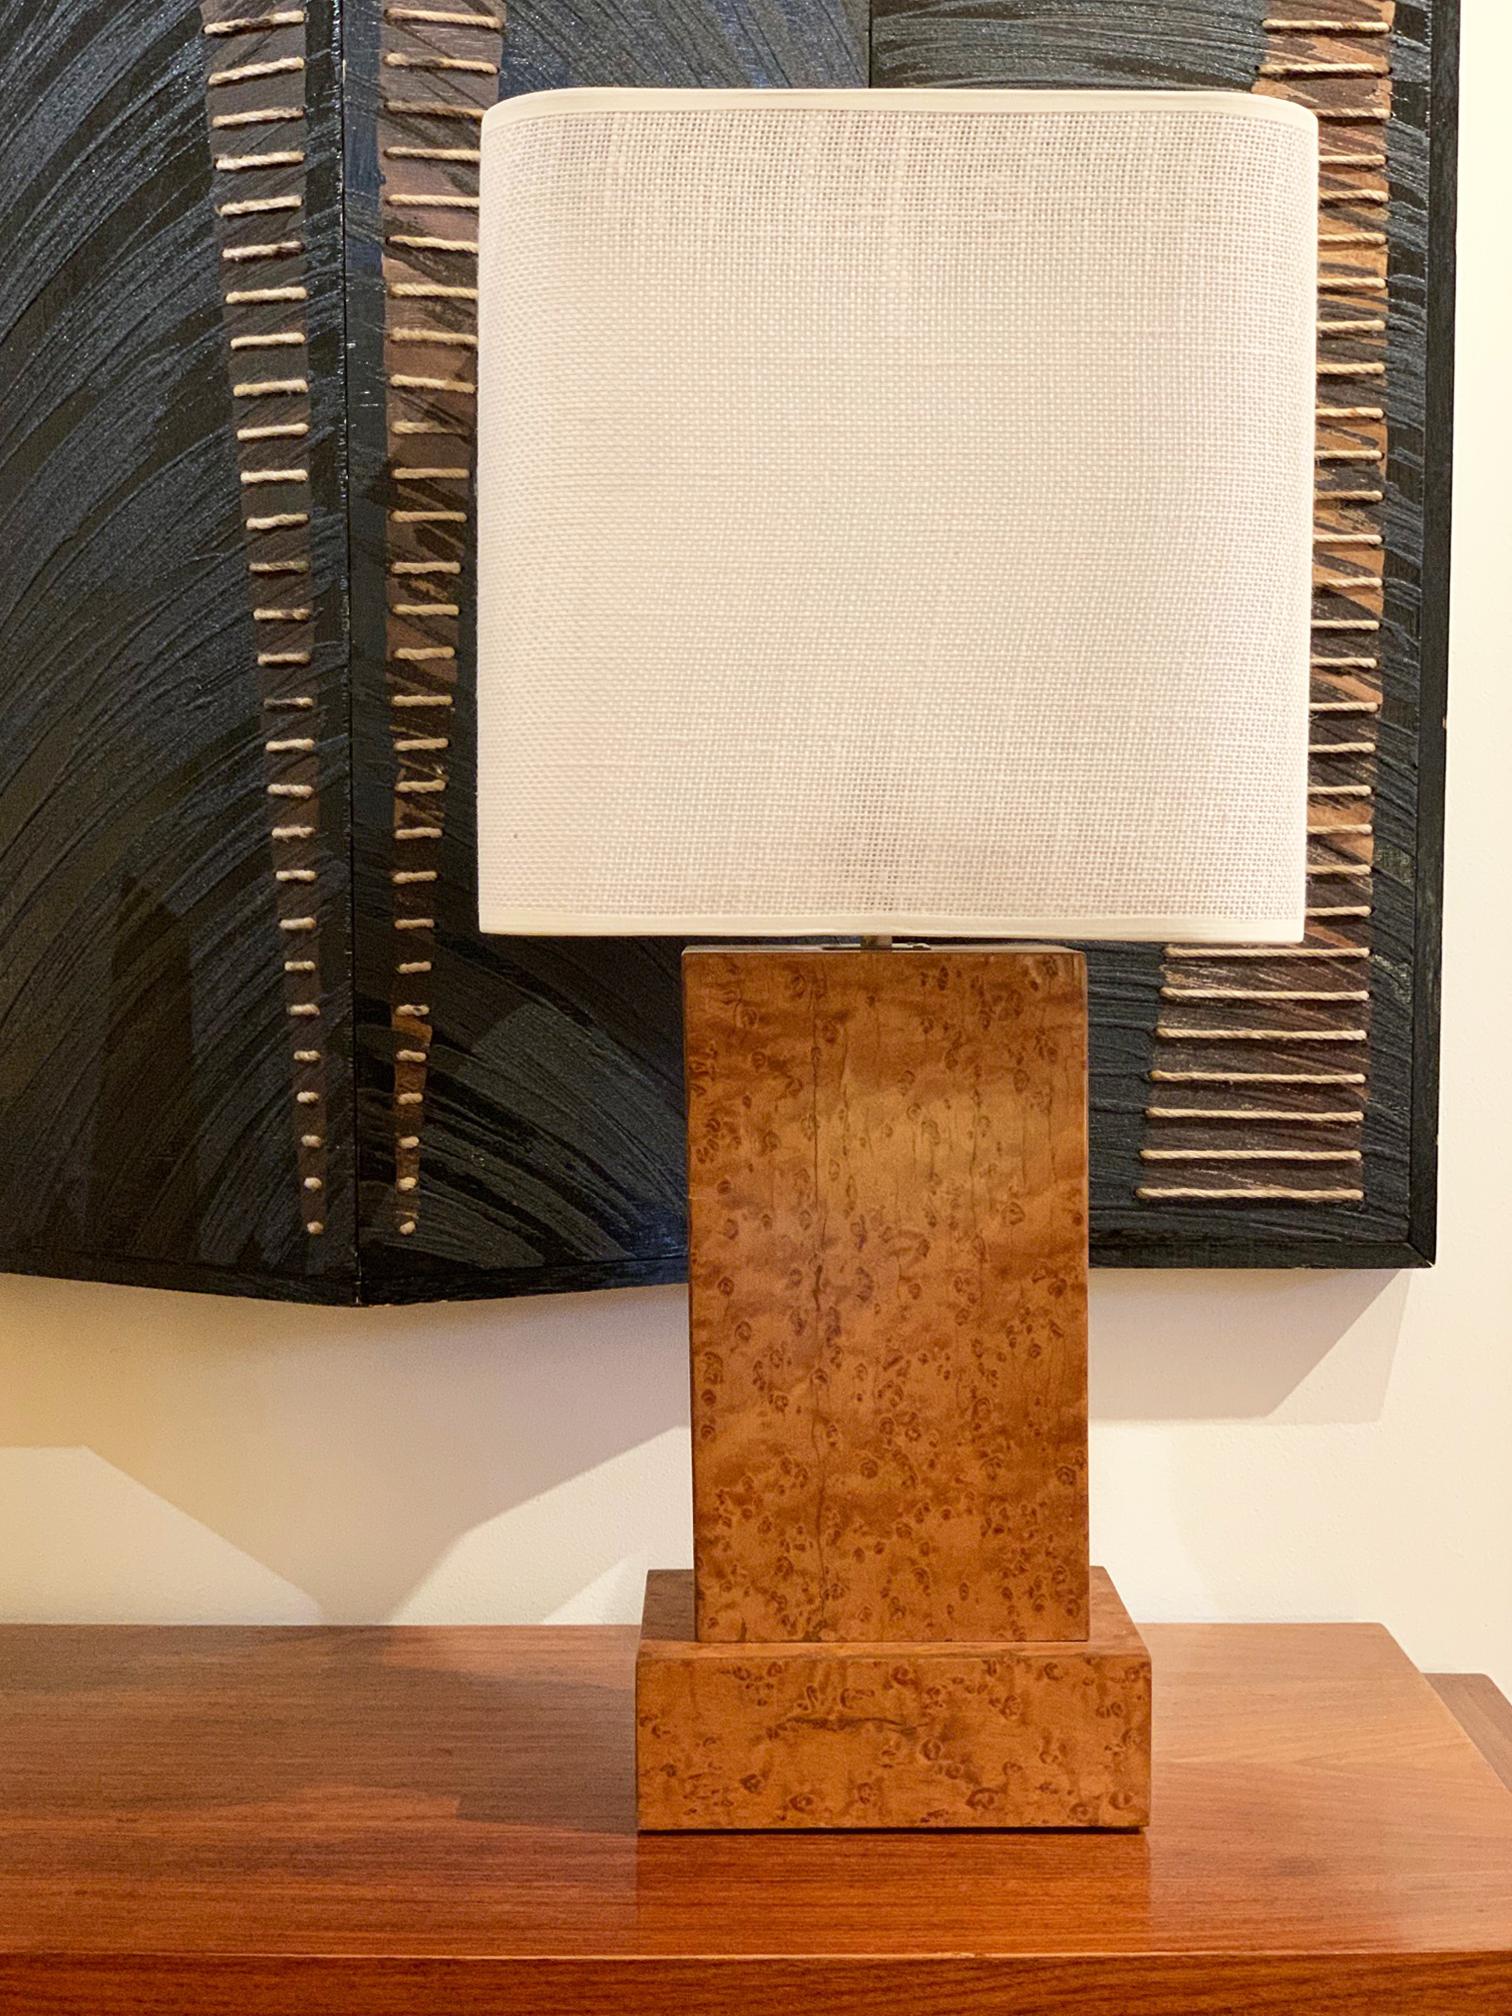 An Art Deco birdeye maple veneer table lamp
France, circa 1940
Including the shade: 66 cm high by 30 cm diameter
Wooden base only, ex fitting: 35 cm high by 20 cm diameter.